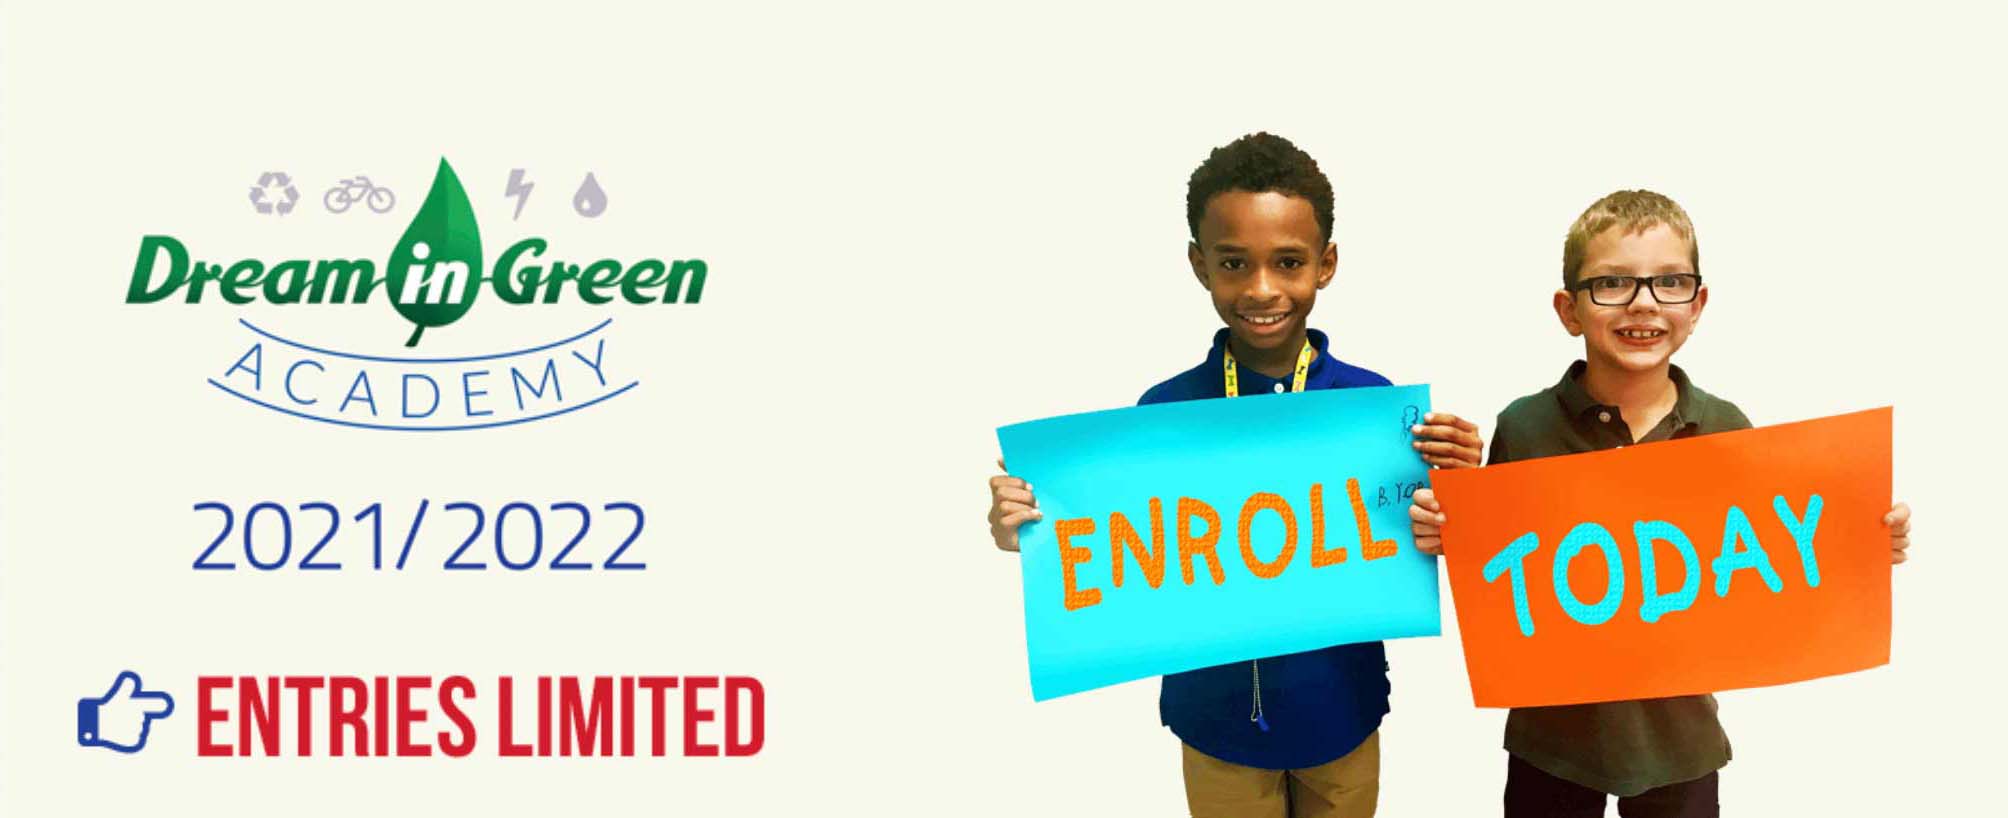 Enroll Today. It's Free.